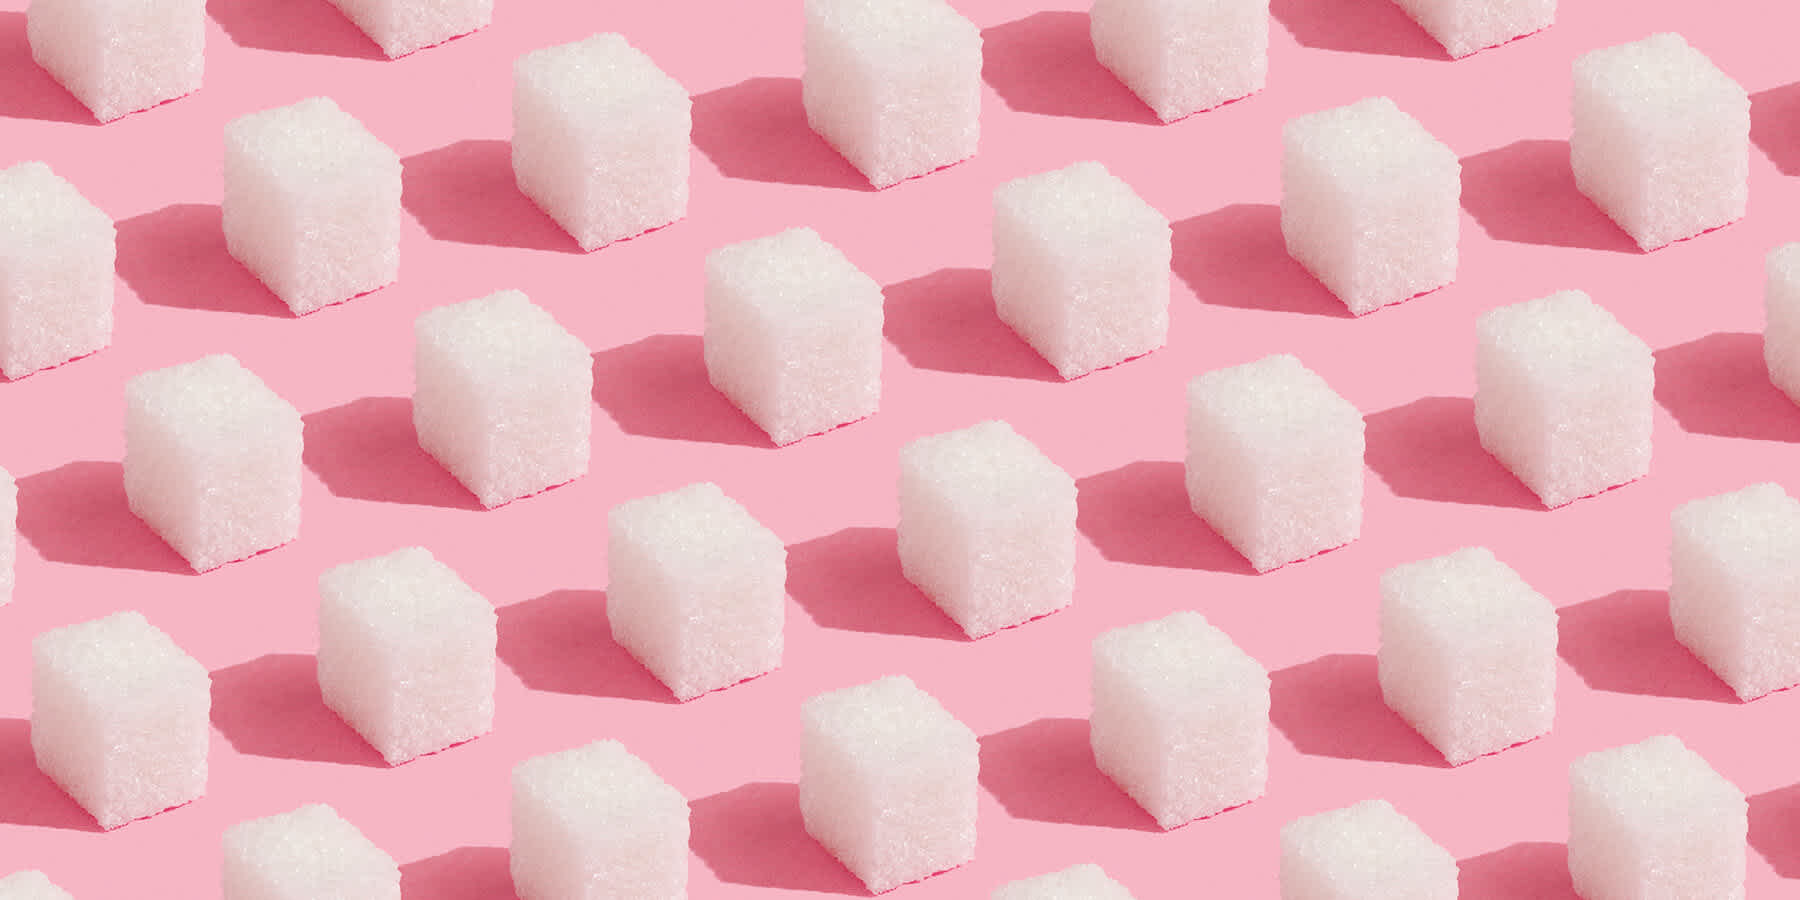 Cubes of sugar against a pink background